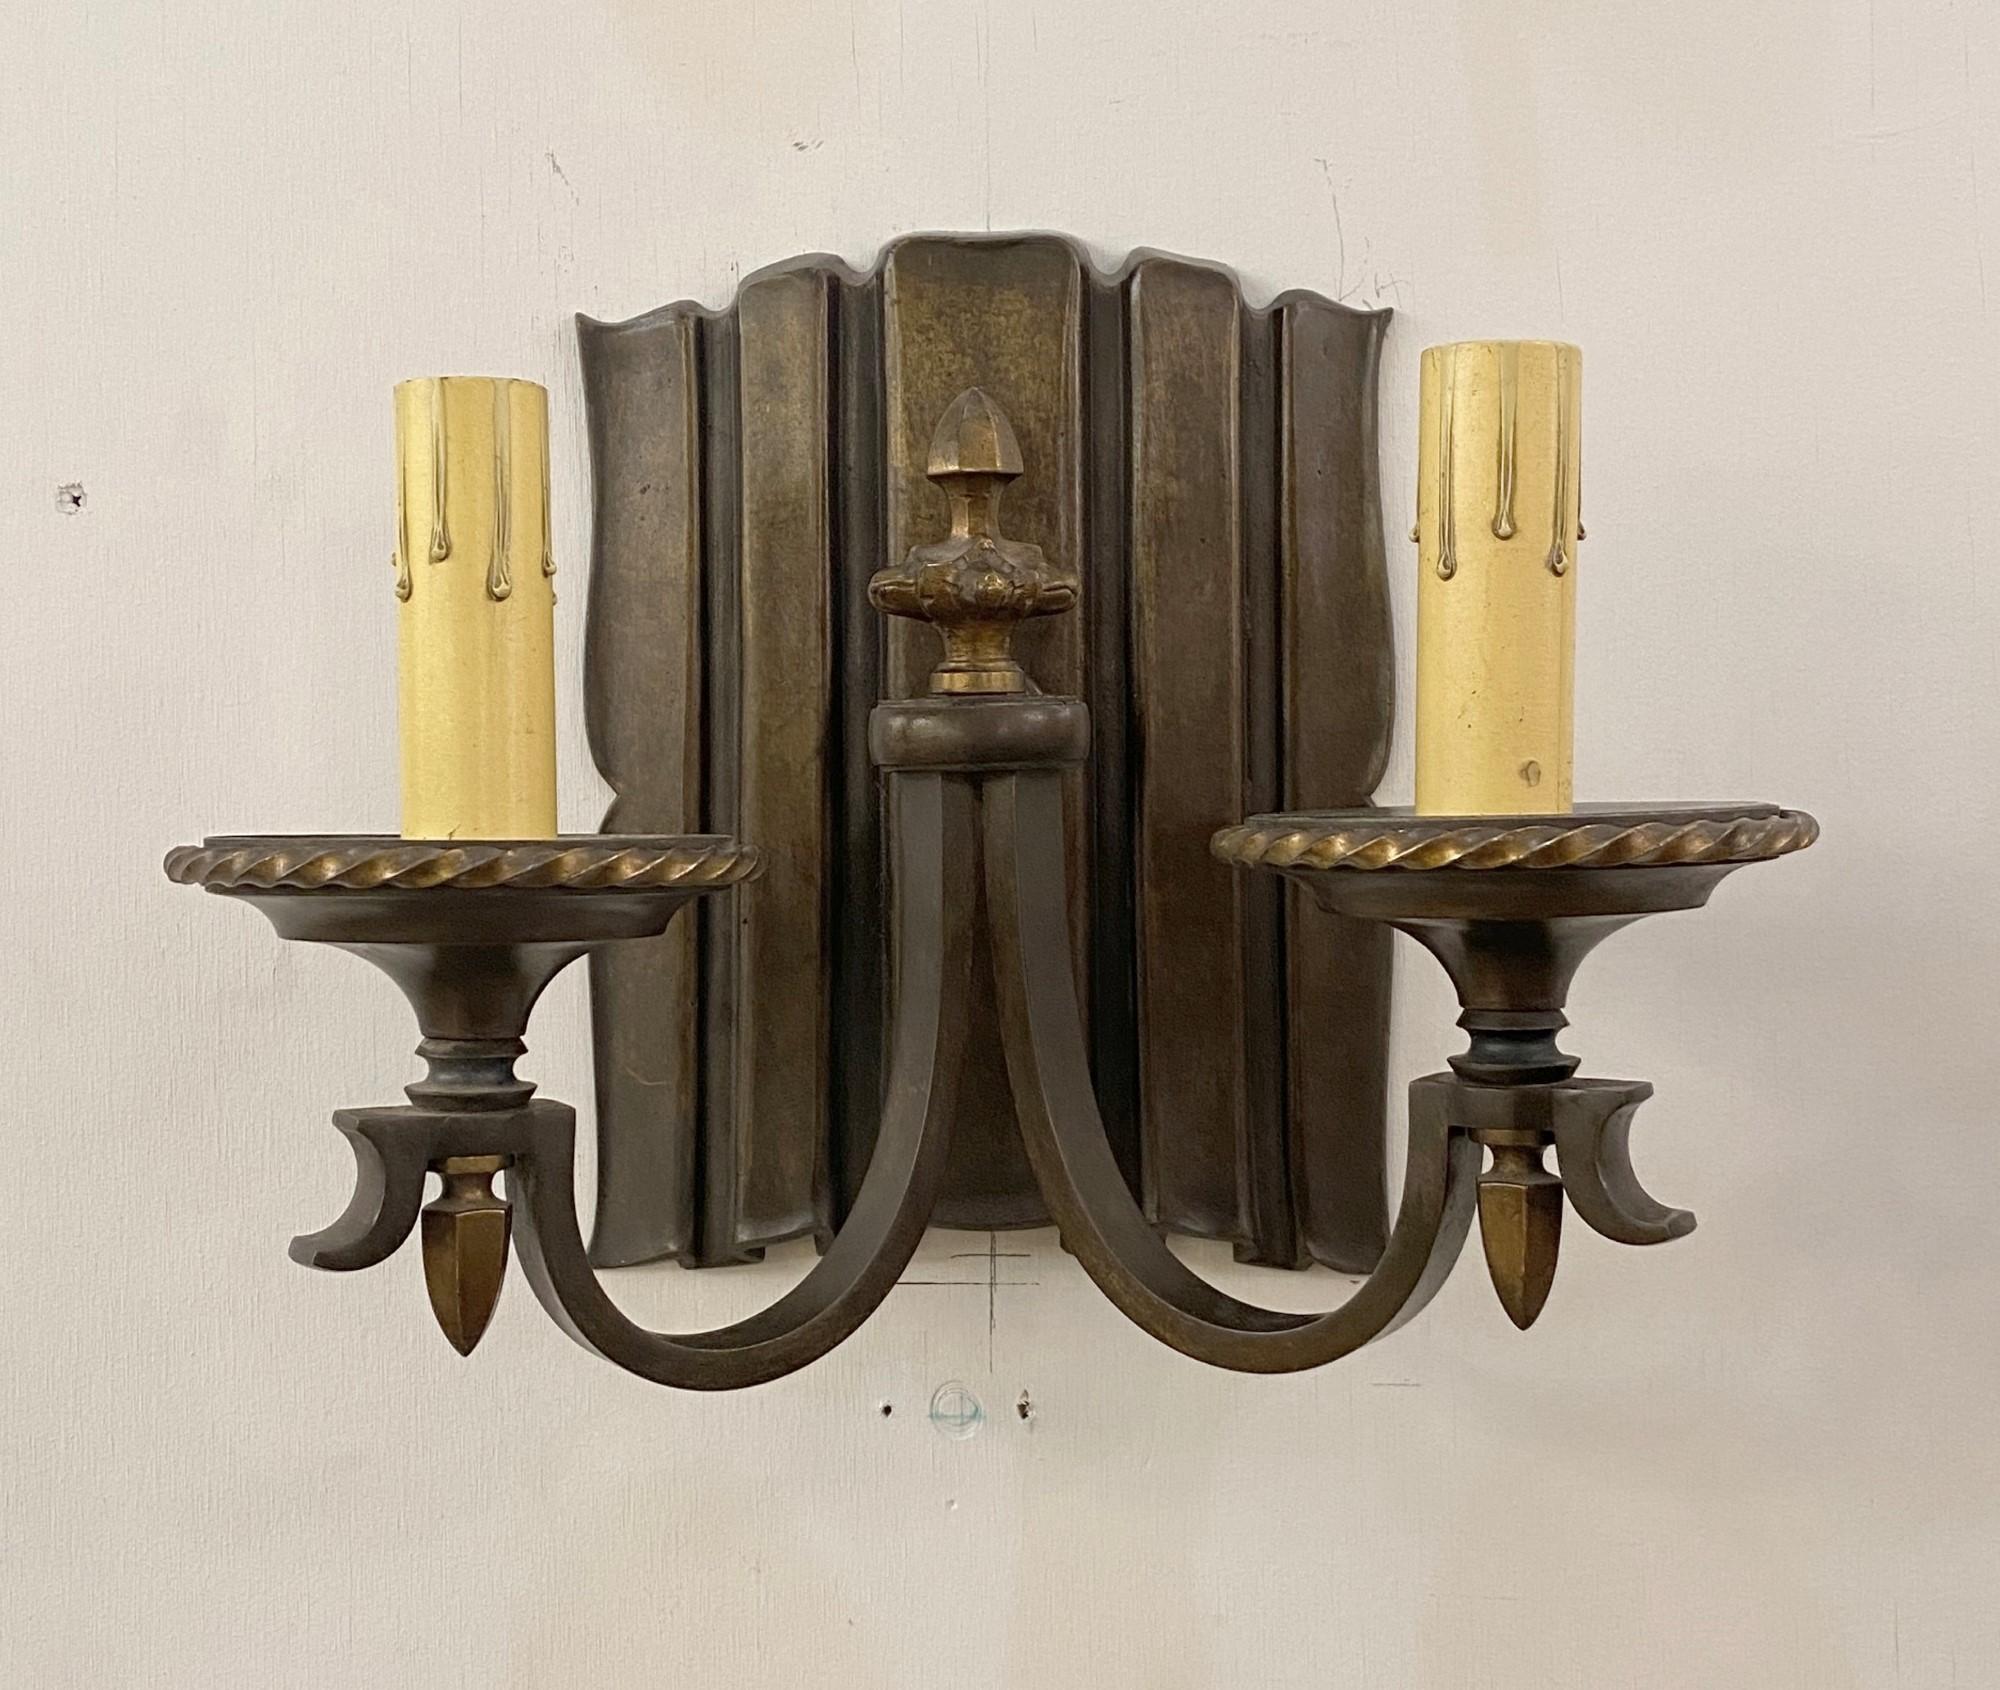 1910s pair of bronze Linenfold wall sconces in original dark patina finish. Each light has two lights. Cleaned and rewired. Sold as a pair. Please note, this item is located in one of our NYC locations.